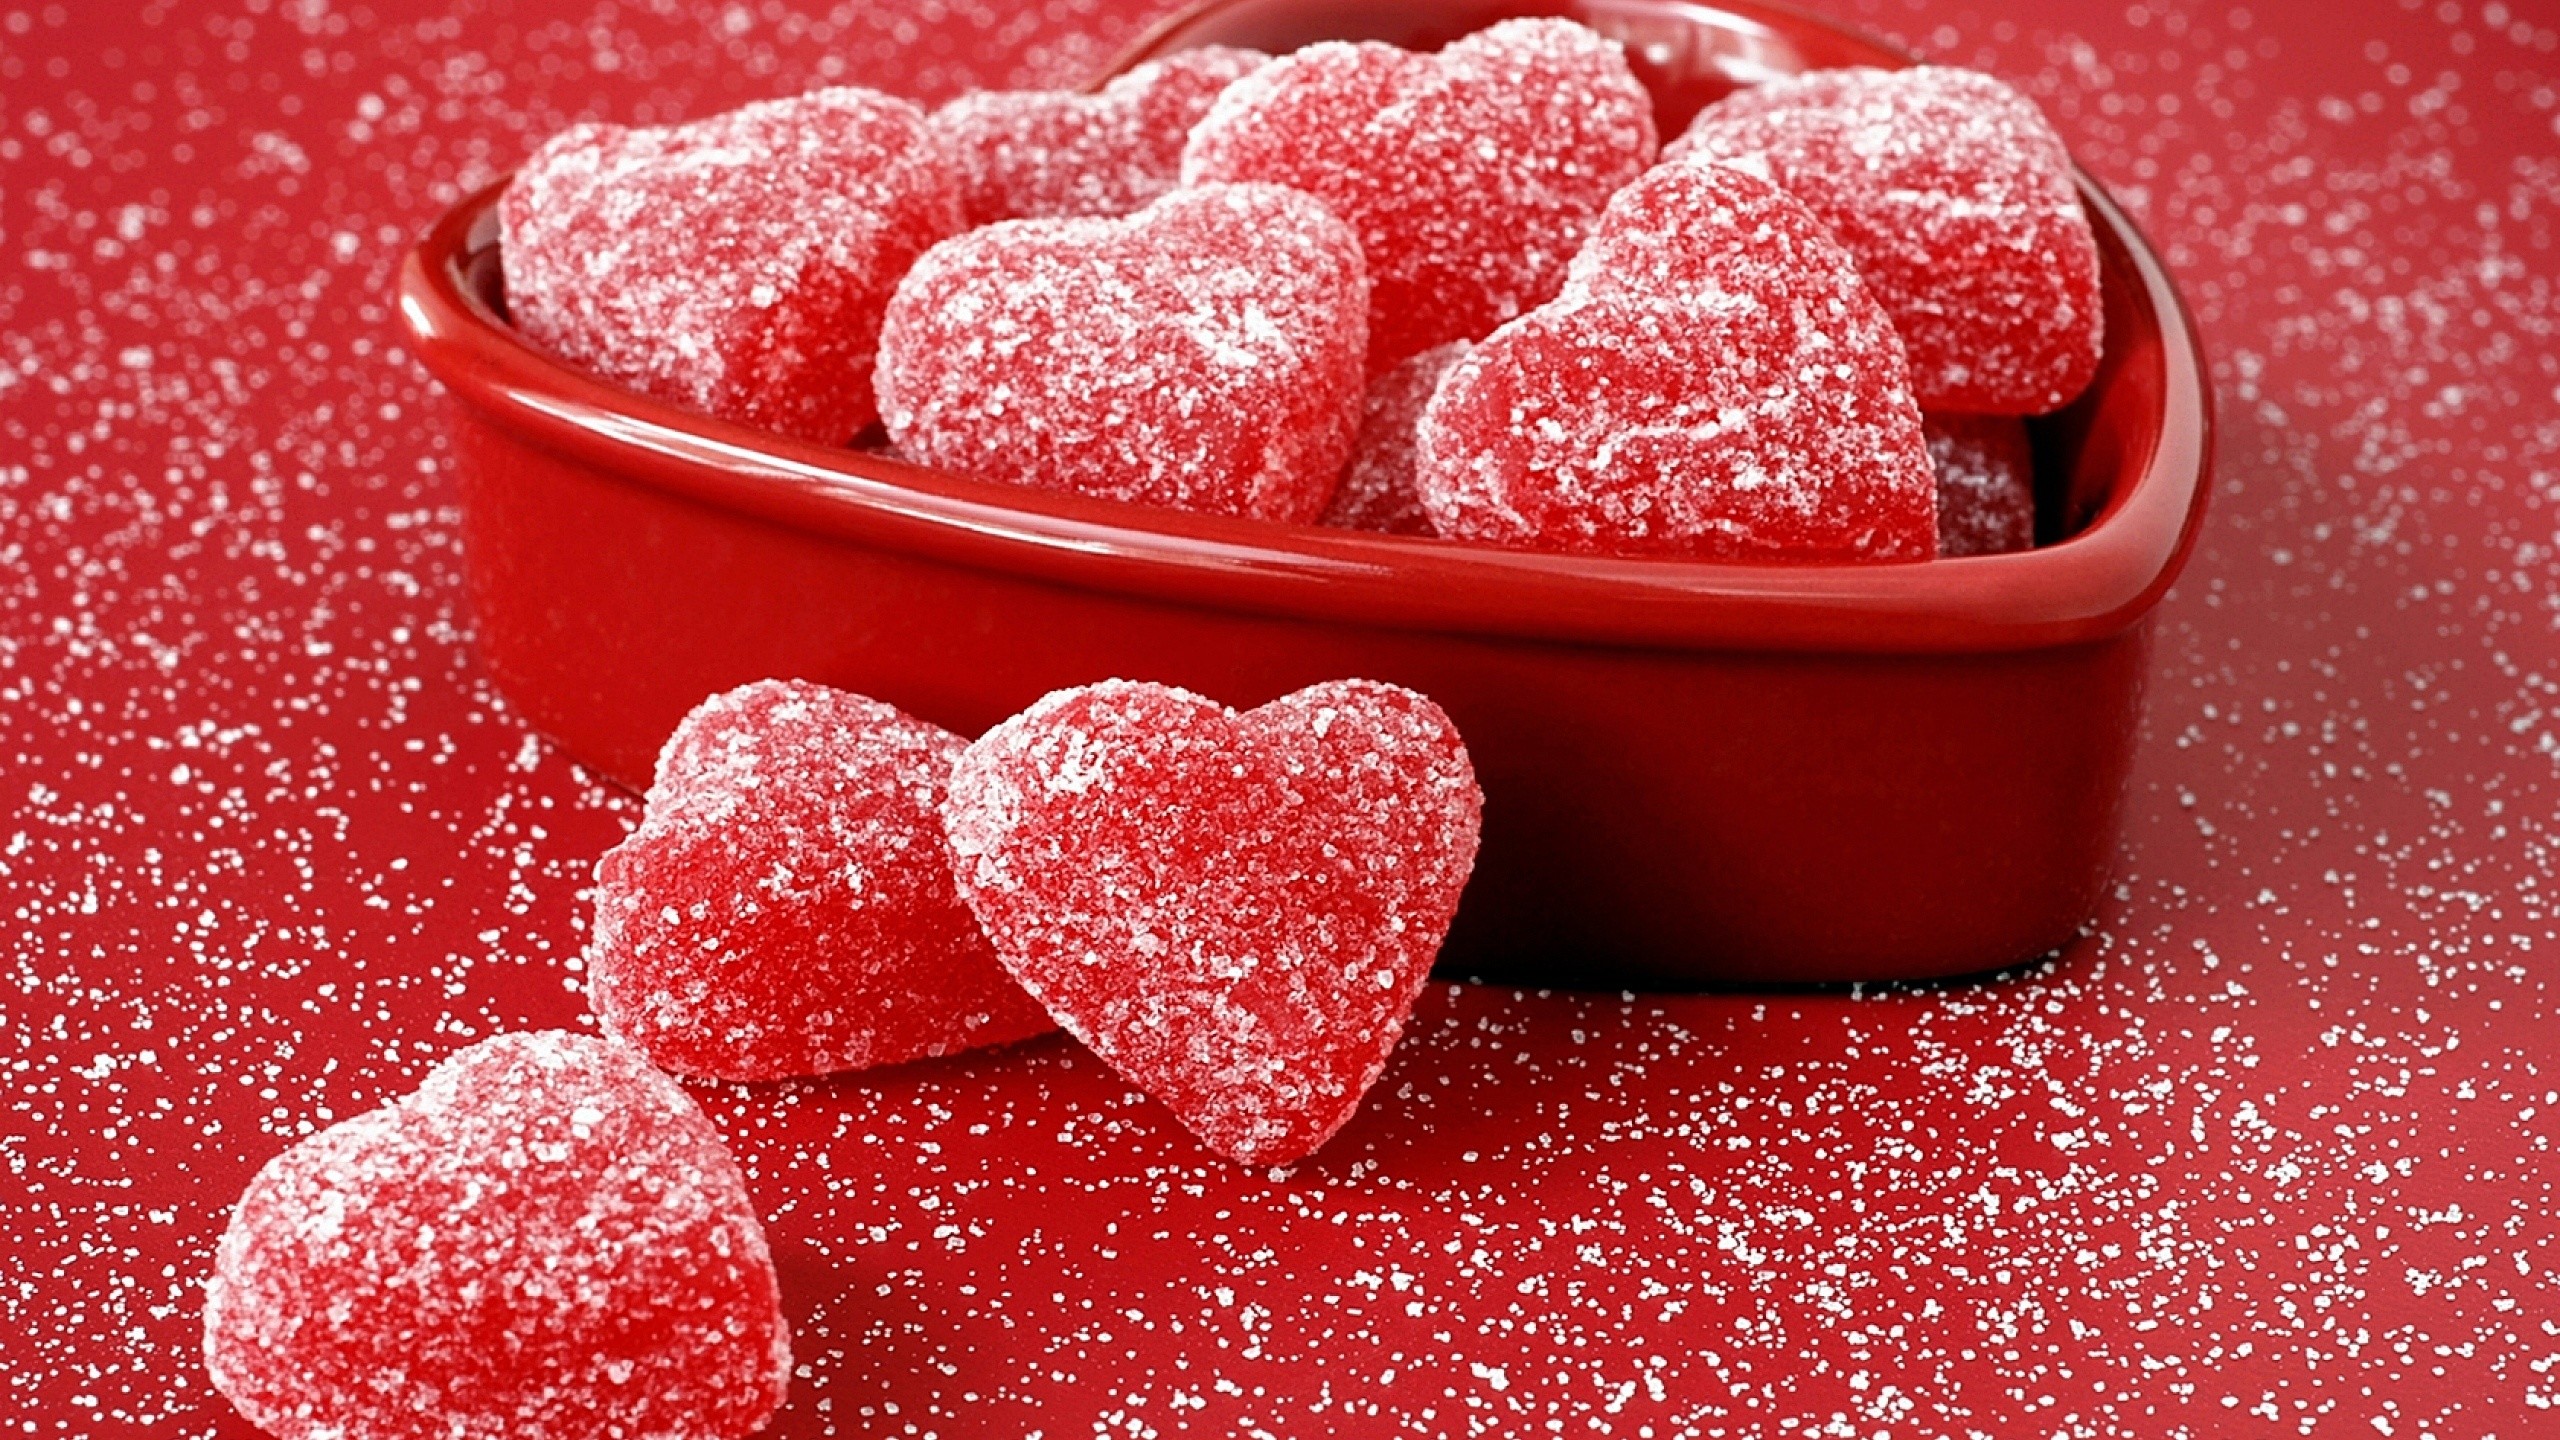 2560x1440 Explore Jelly Hearts, Sweet Hearts, and more!